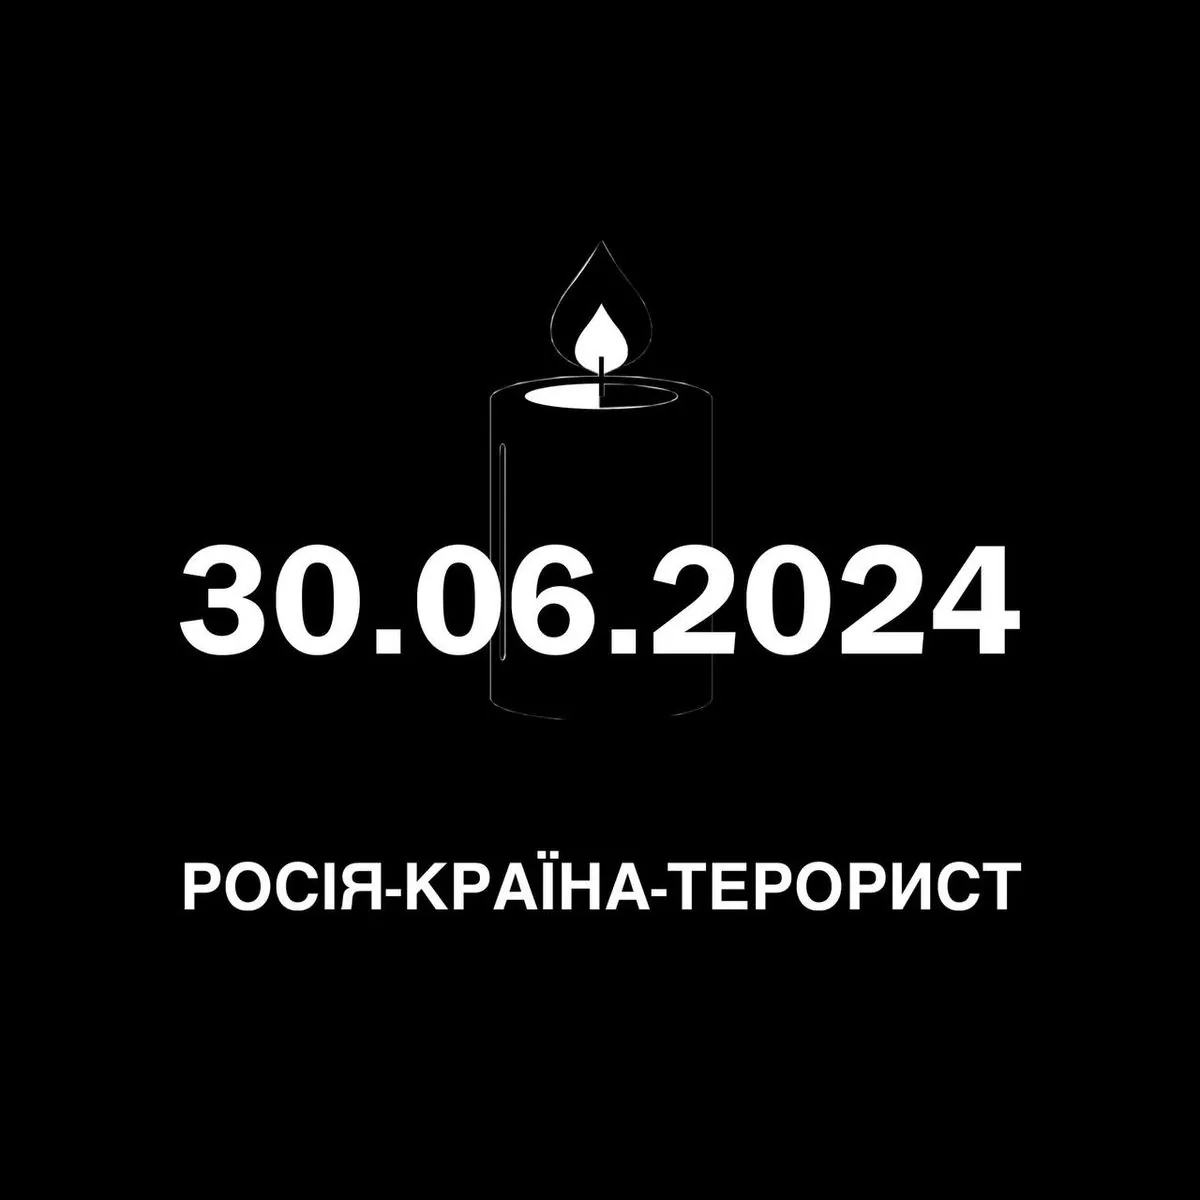 zaporizhzhia-region-declares-a-day-of-mourning-after-deadly-enemy-attack-in-vilnyansk-7-people-killed-including-3-children